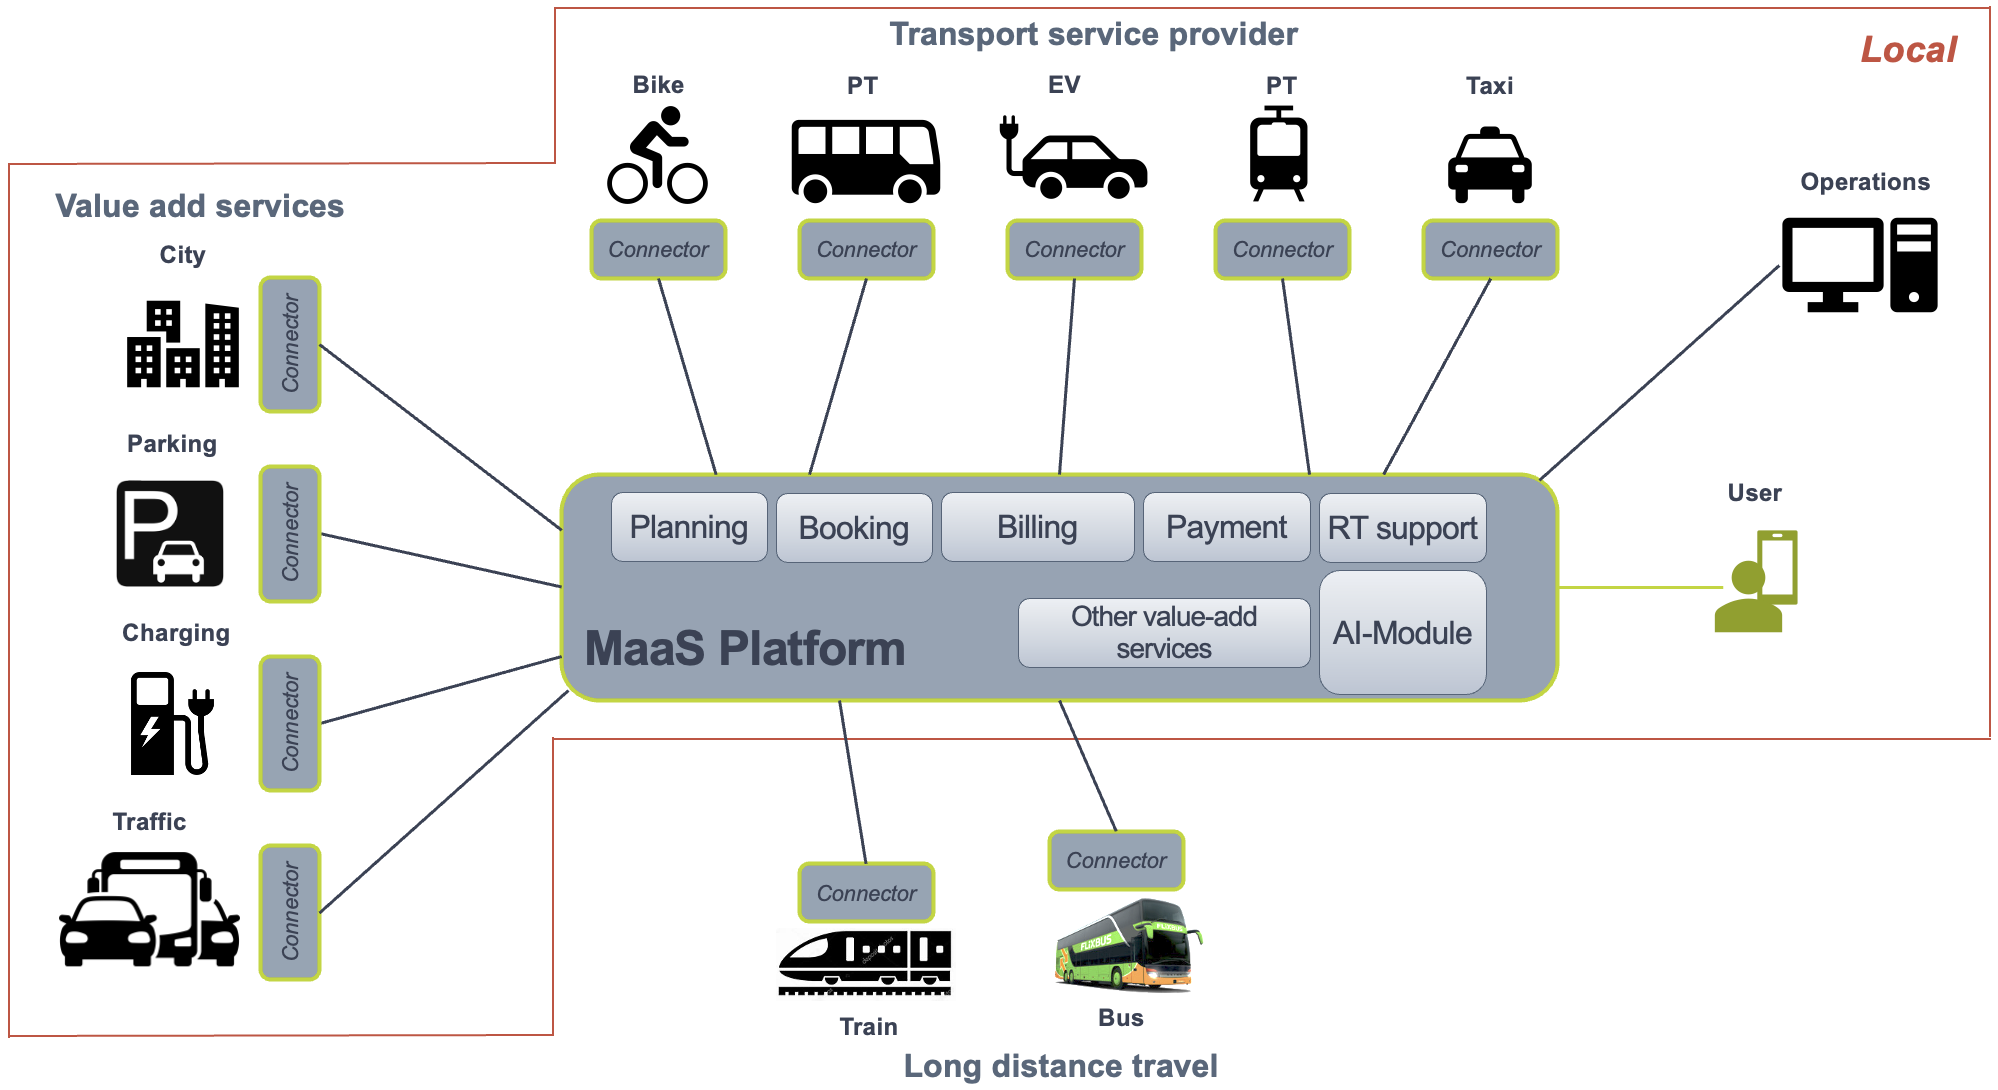 A diagram of a transportation system</p>
<p>Description automatically generated